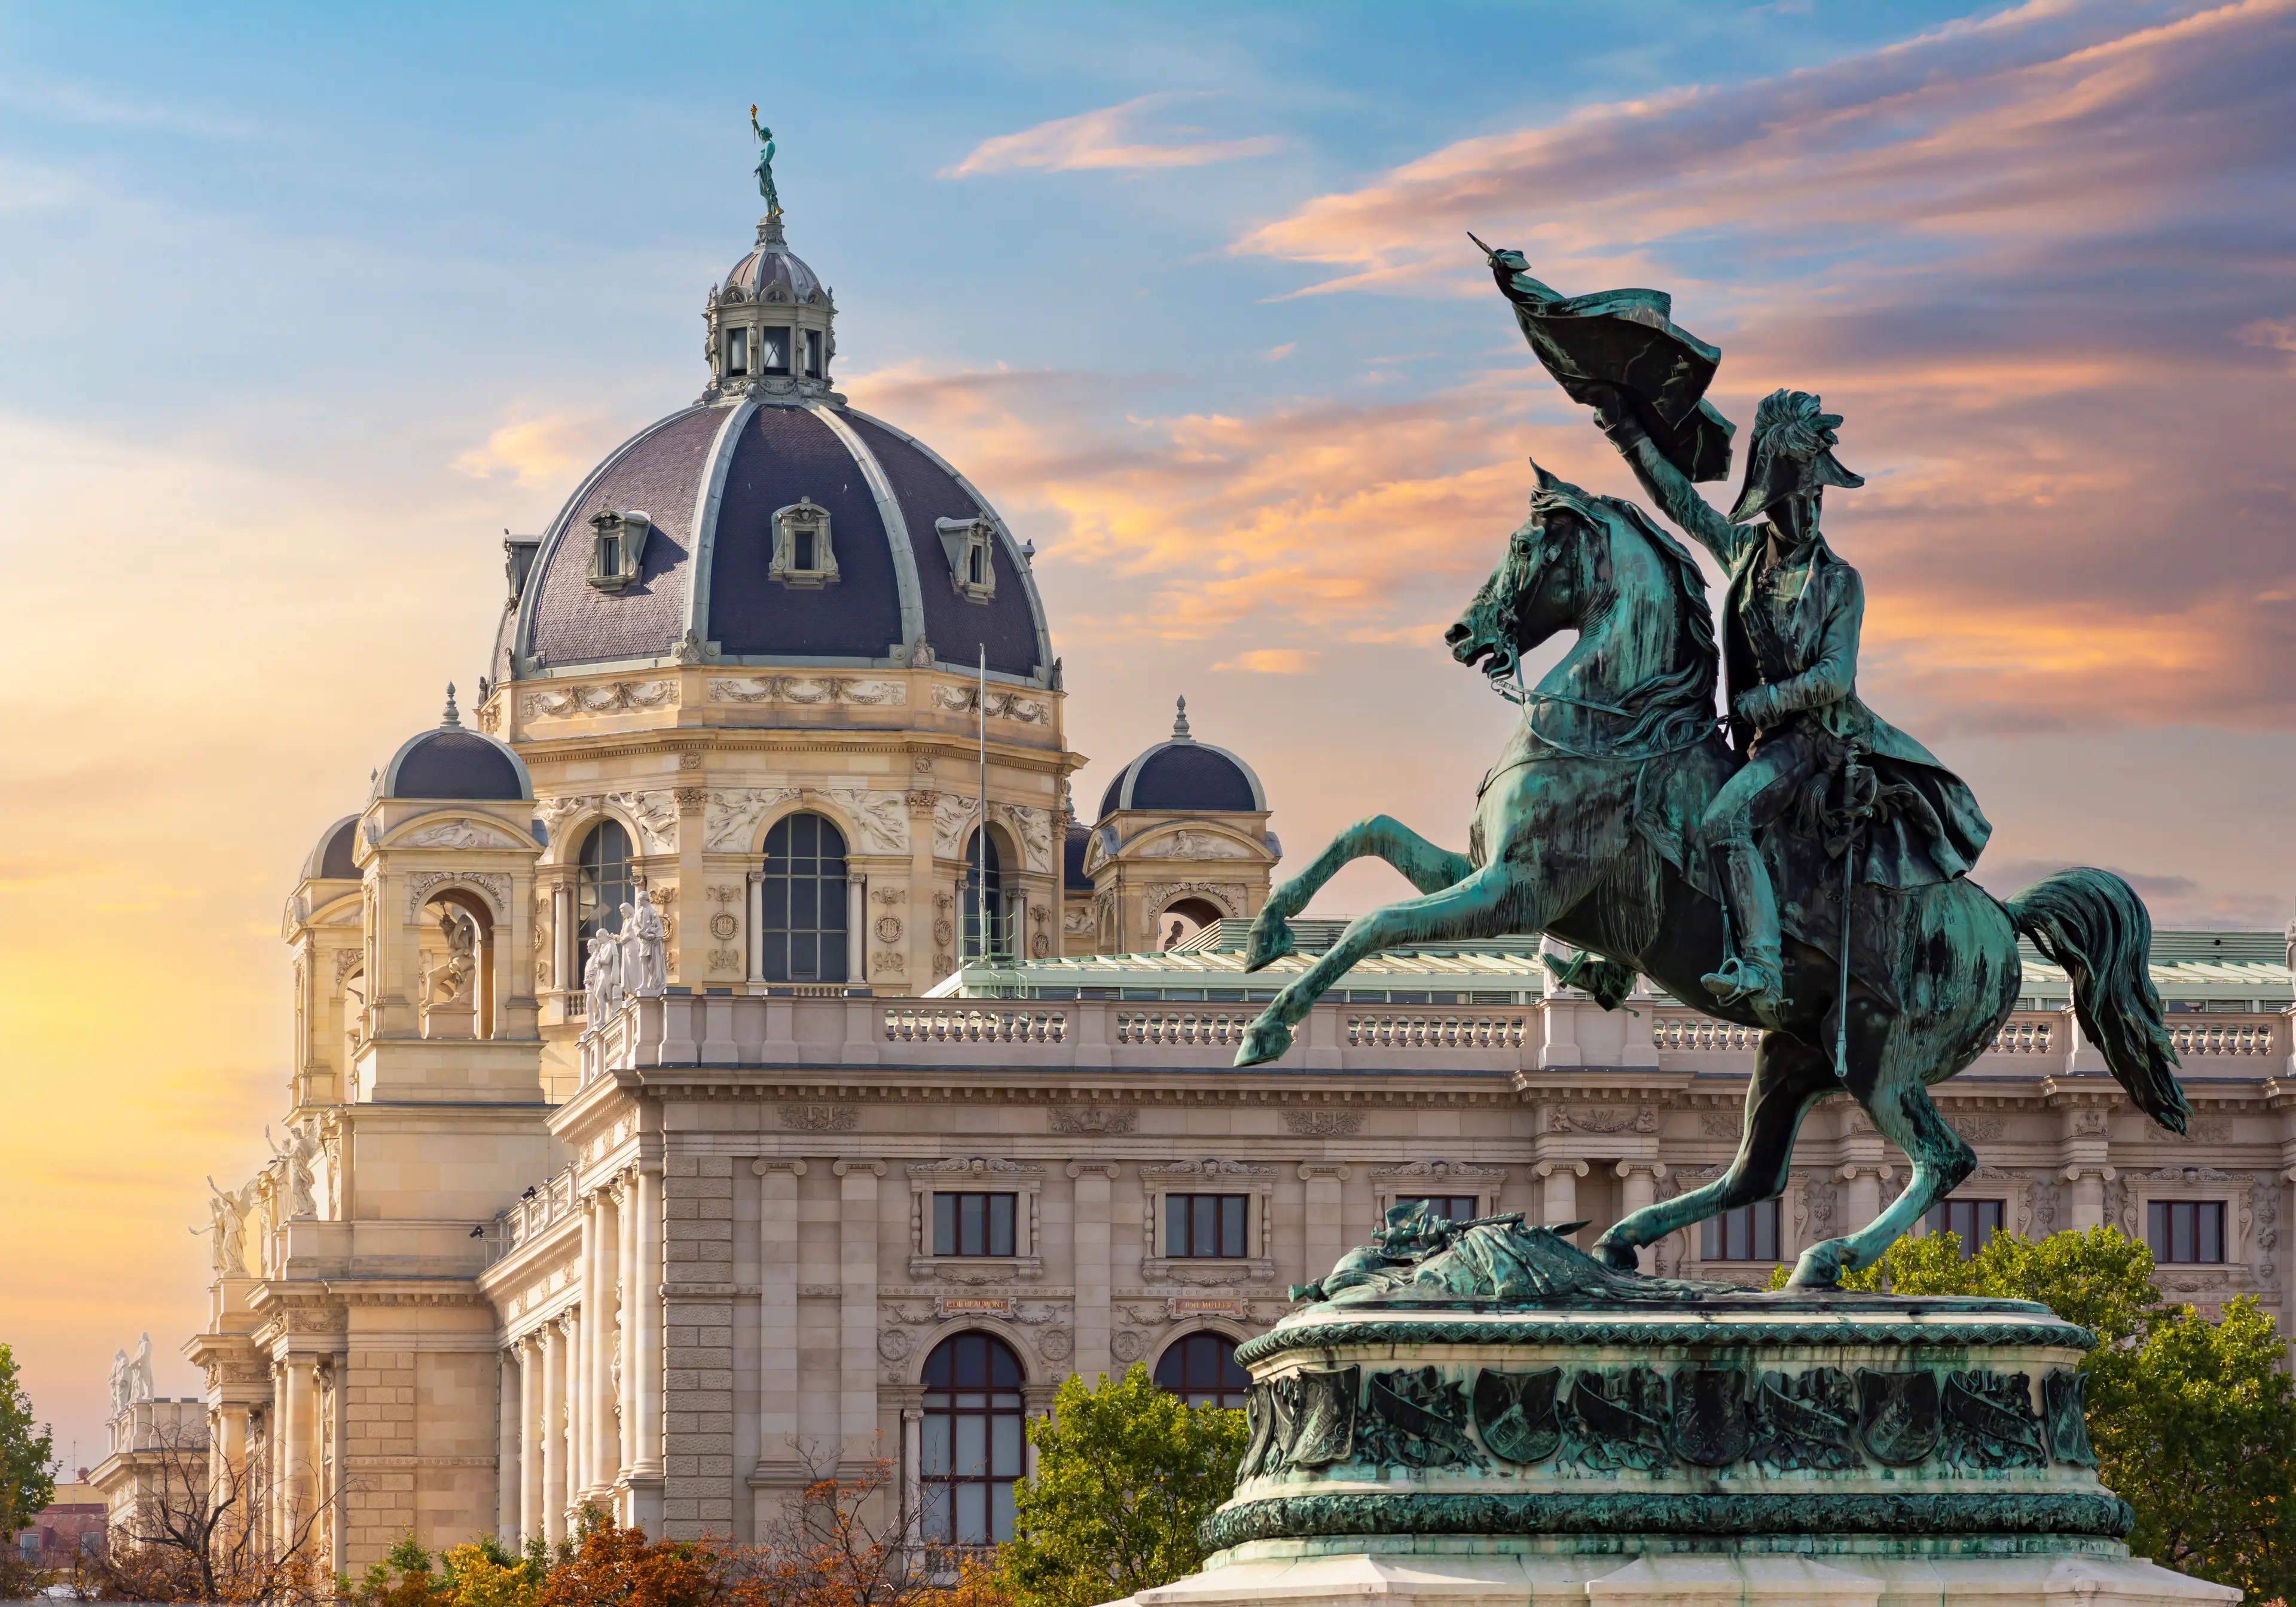 3-Day Vienna Adventure and Relaxation Itinerary for Couples